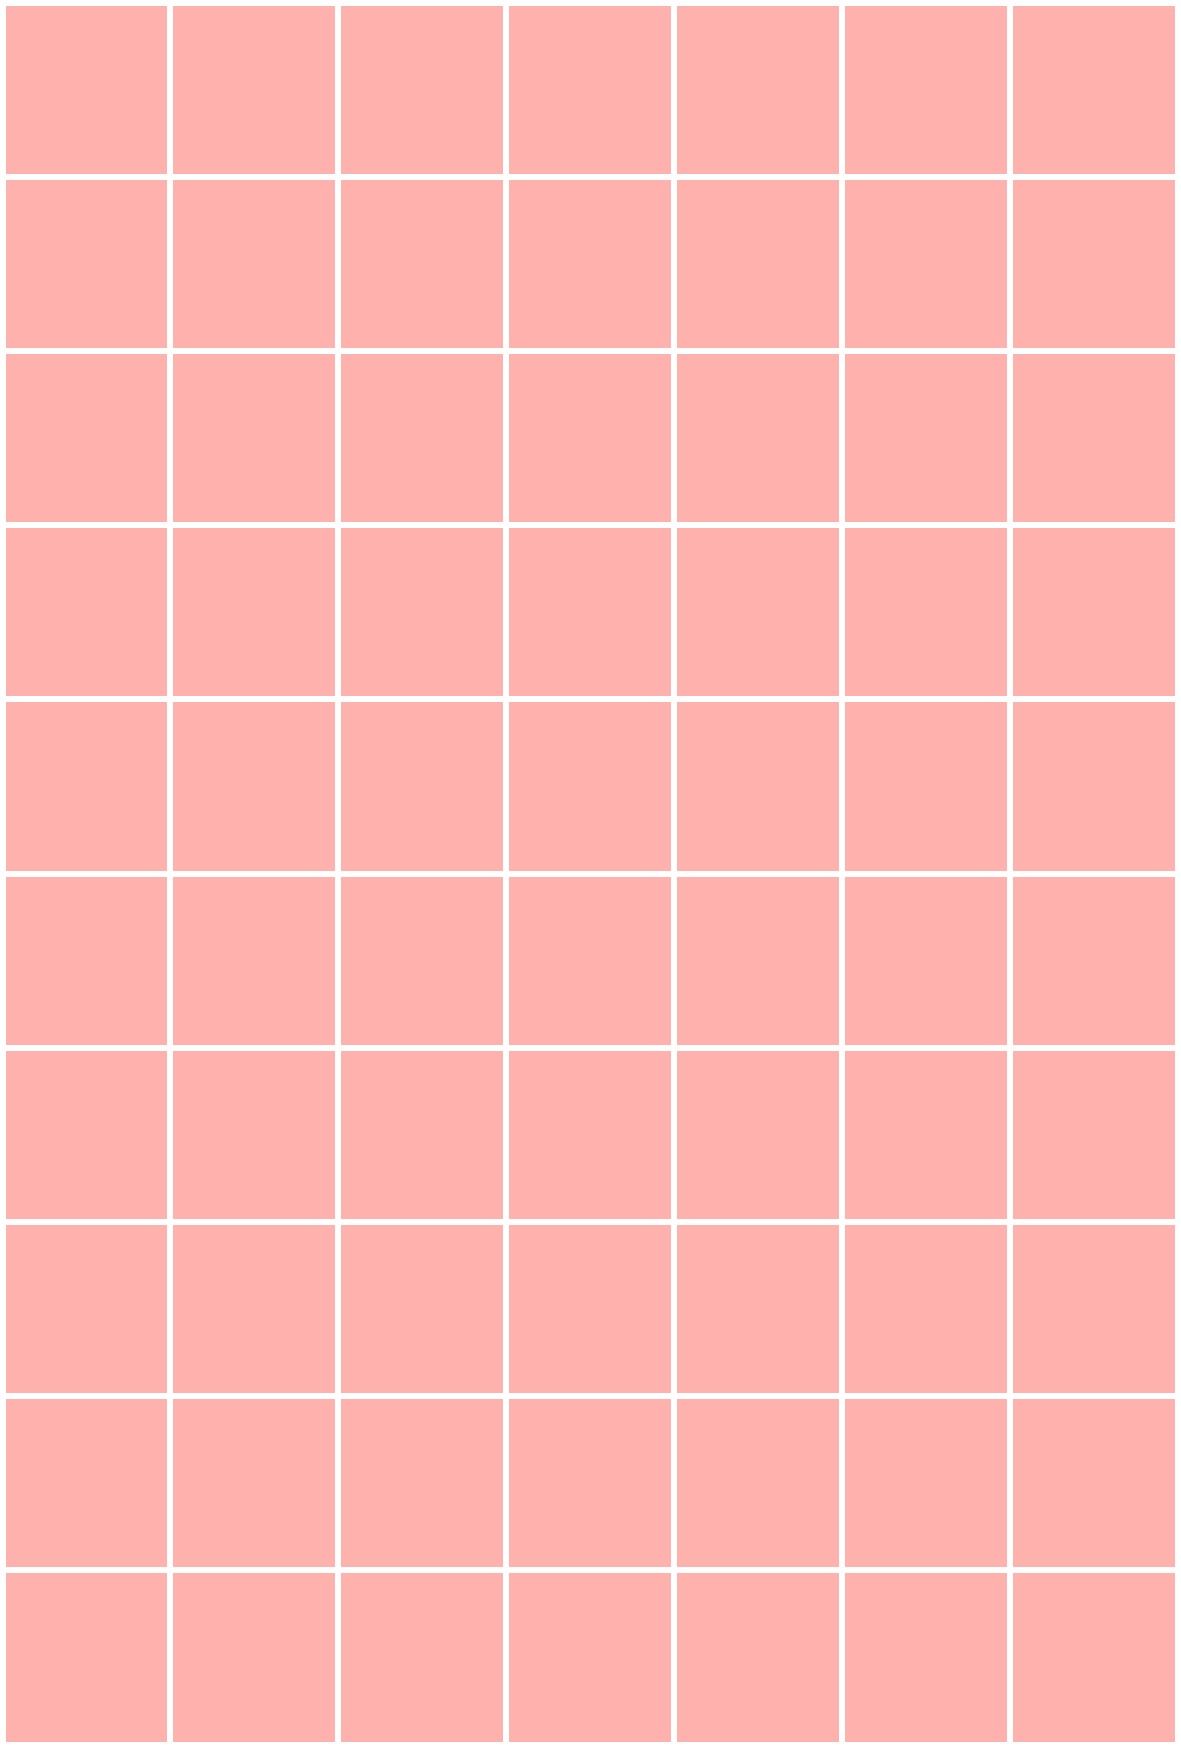 A pink square with white squares - Grid